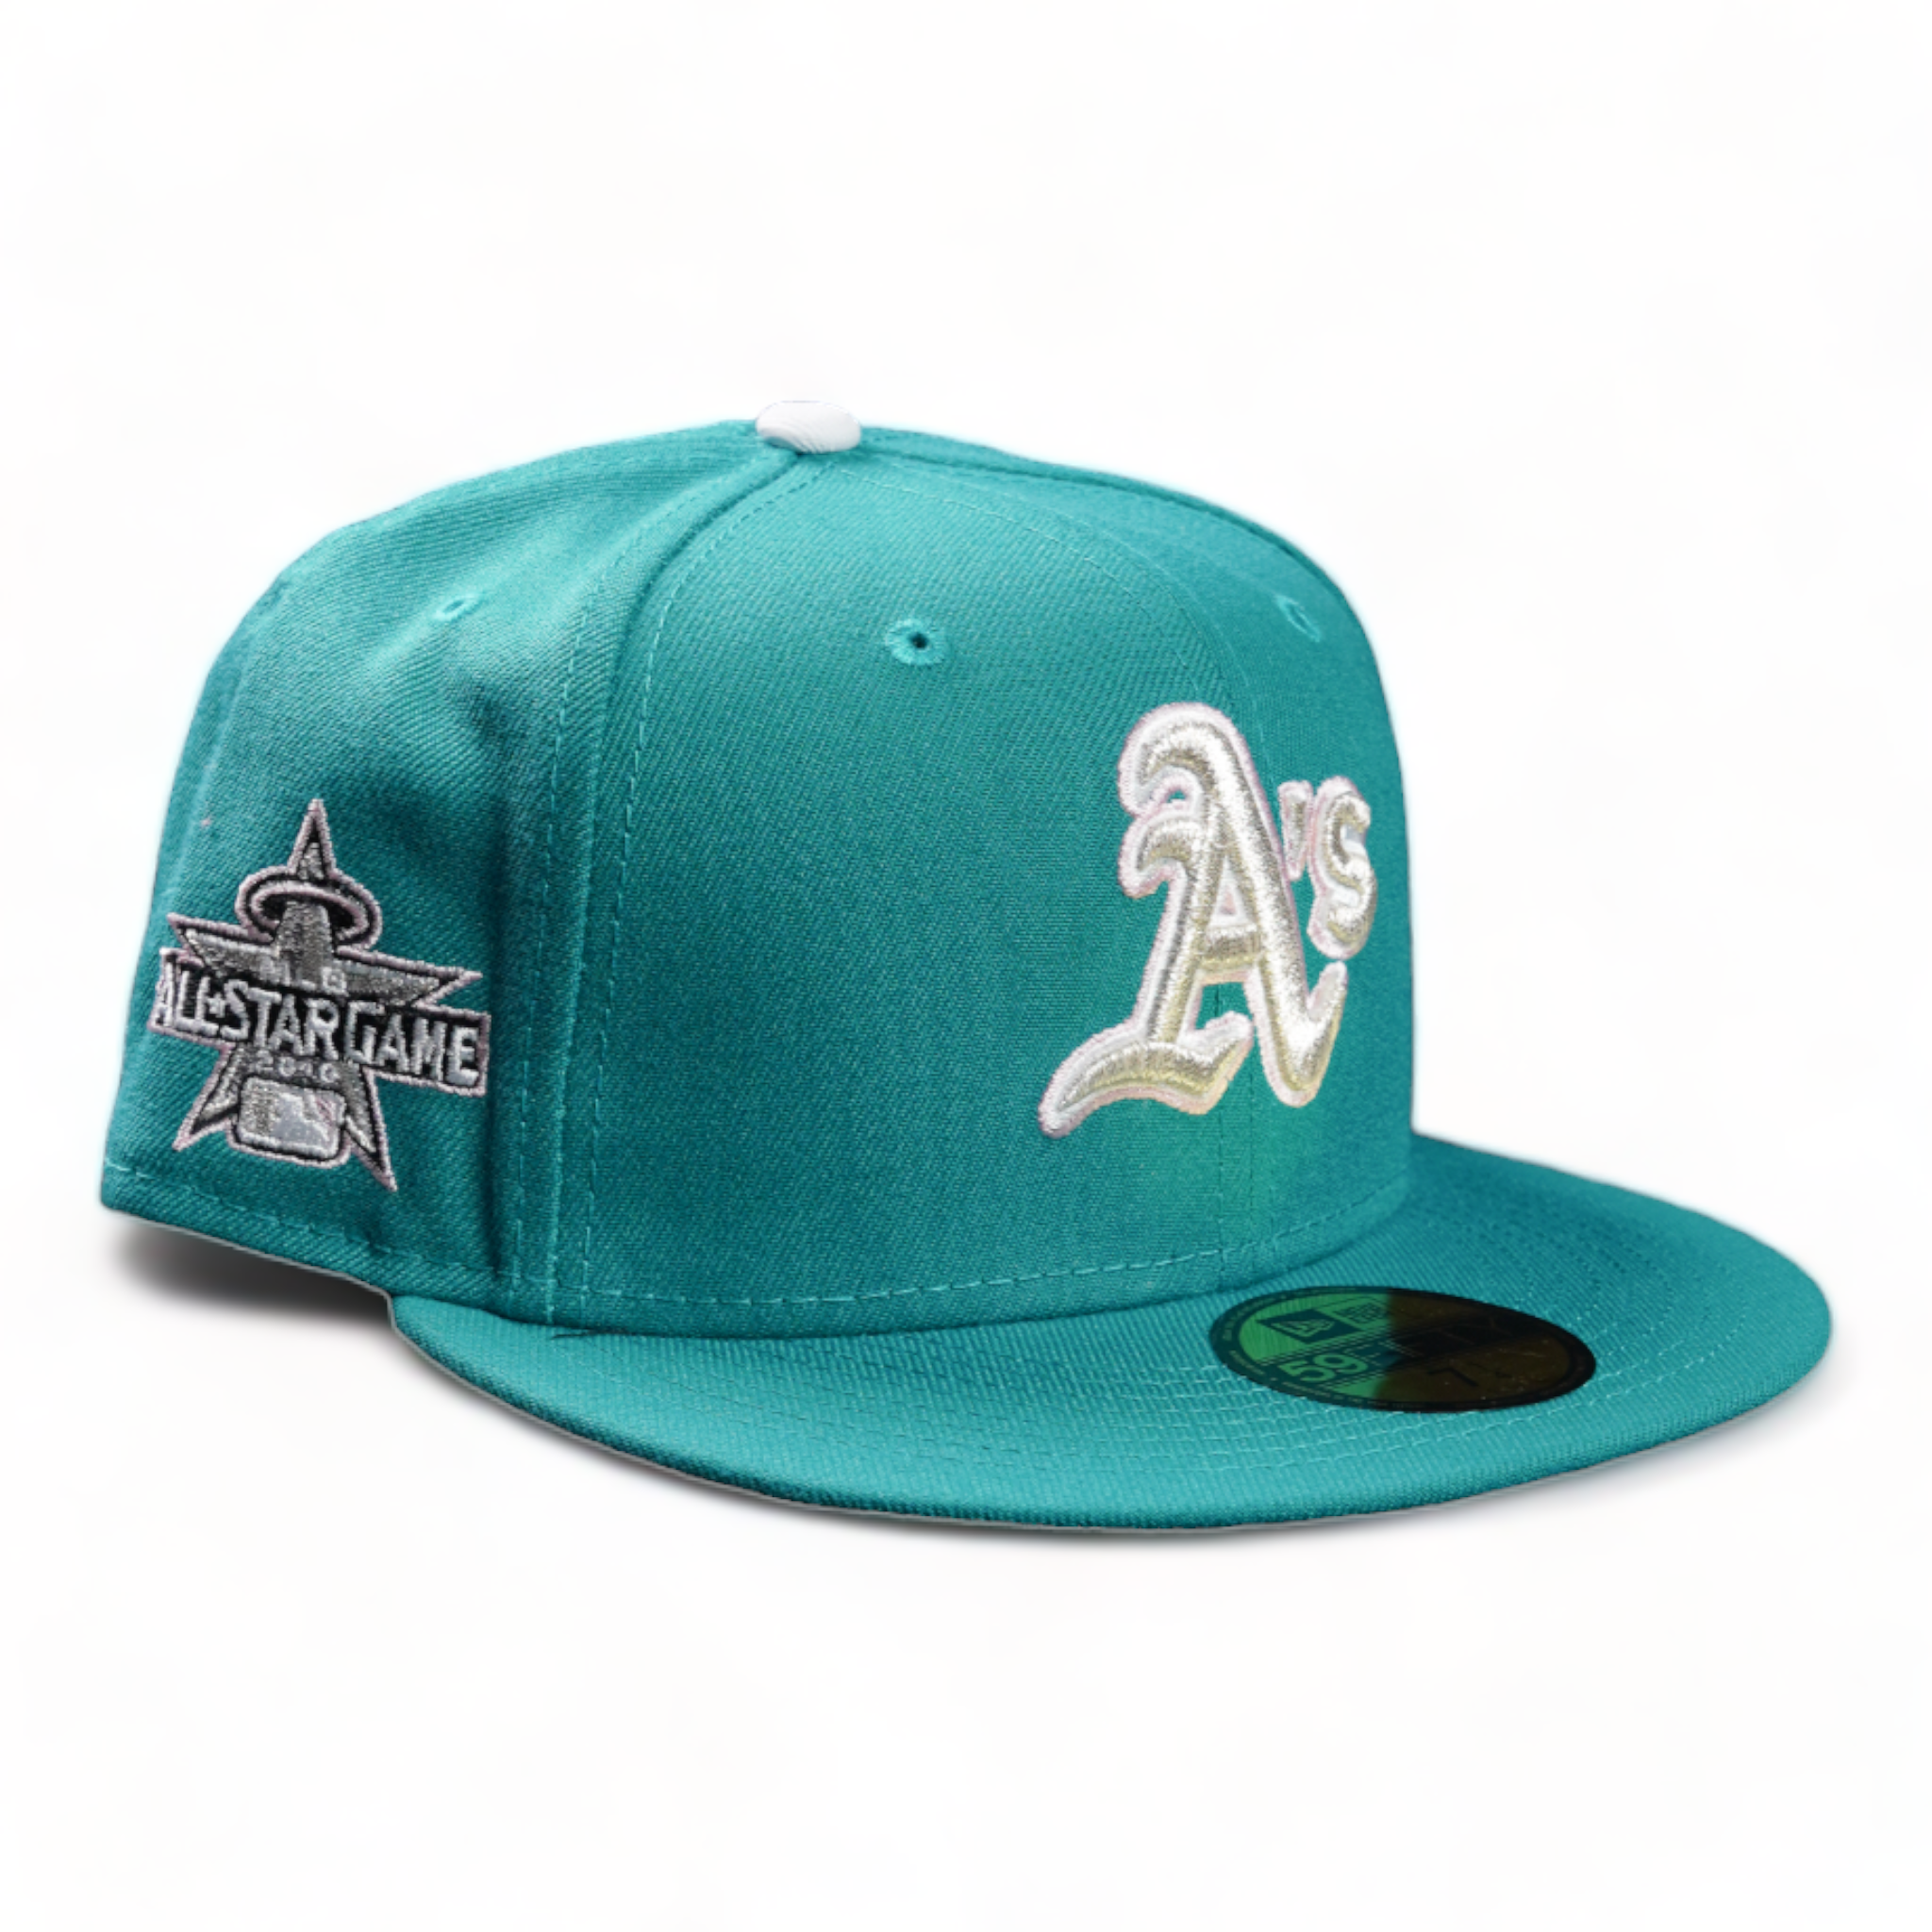 New Era 59Fifty Miki and Friends Collection Fitted Oakland Athletics (Teal/Teal)